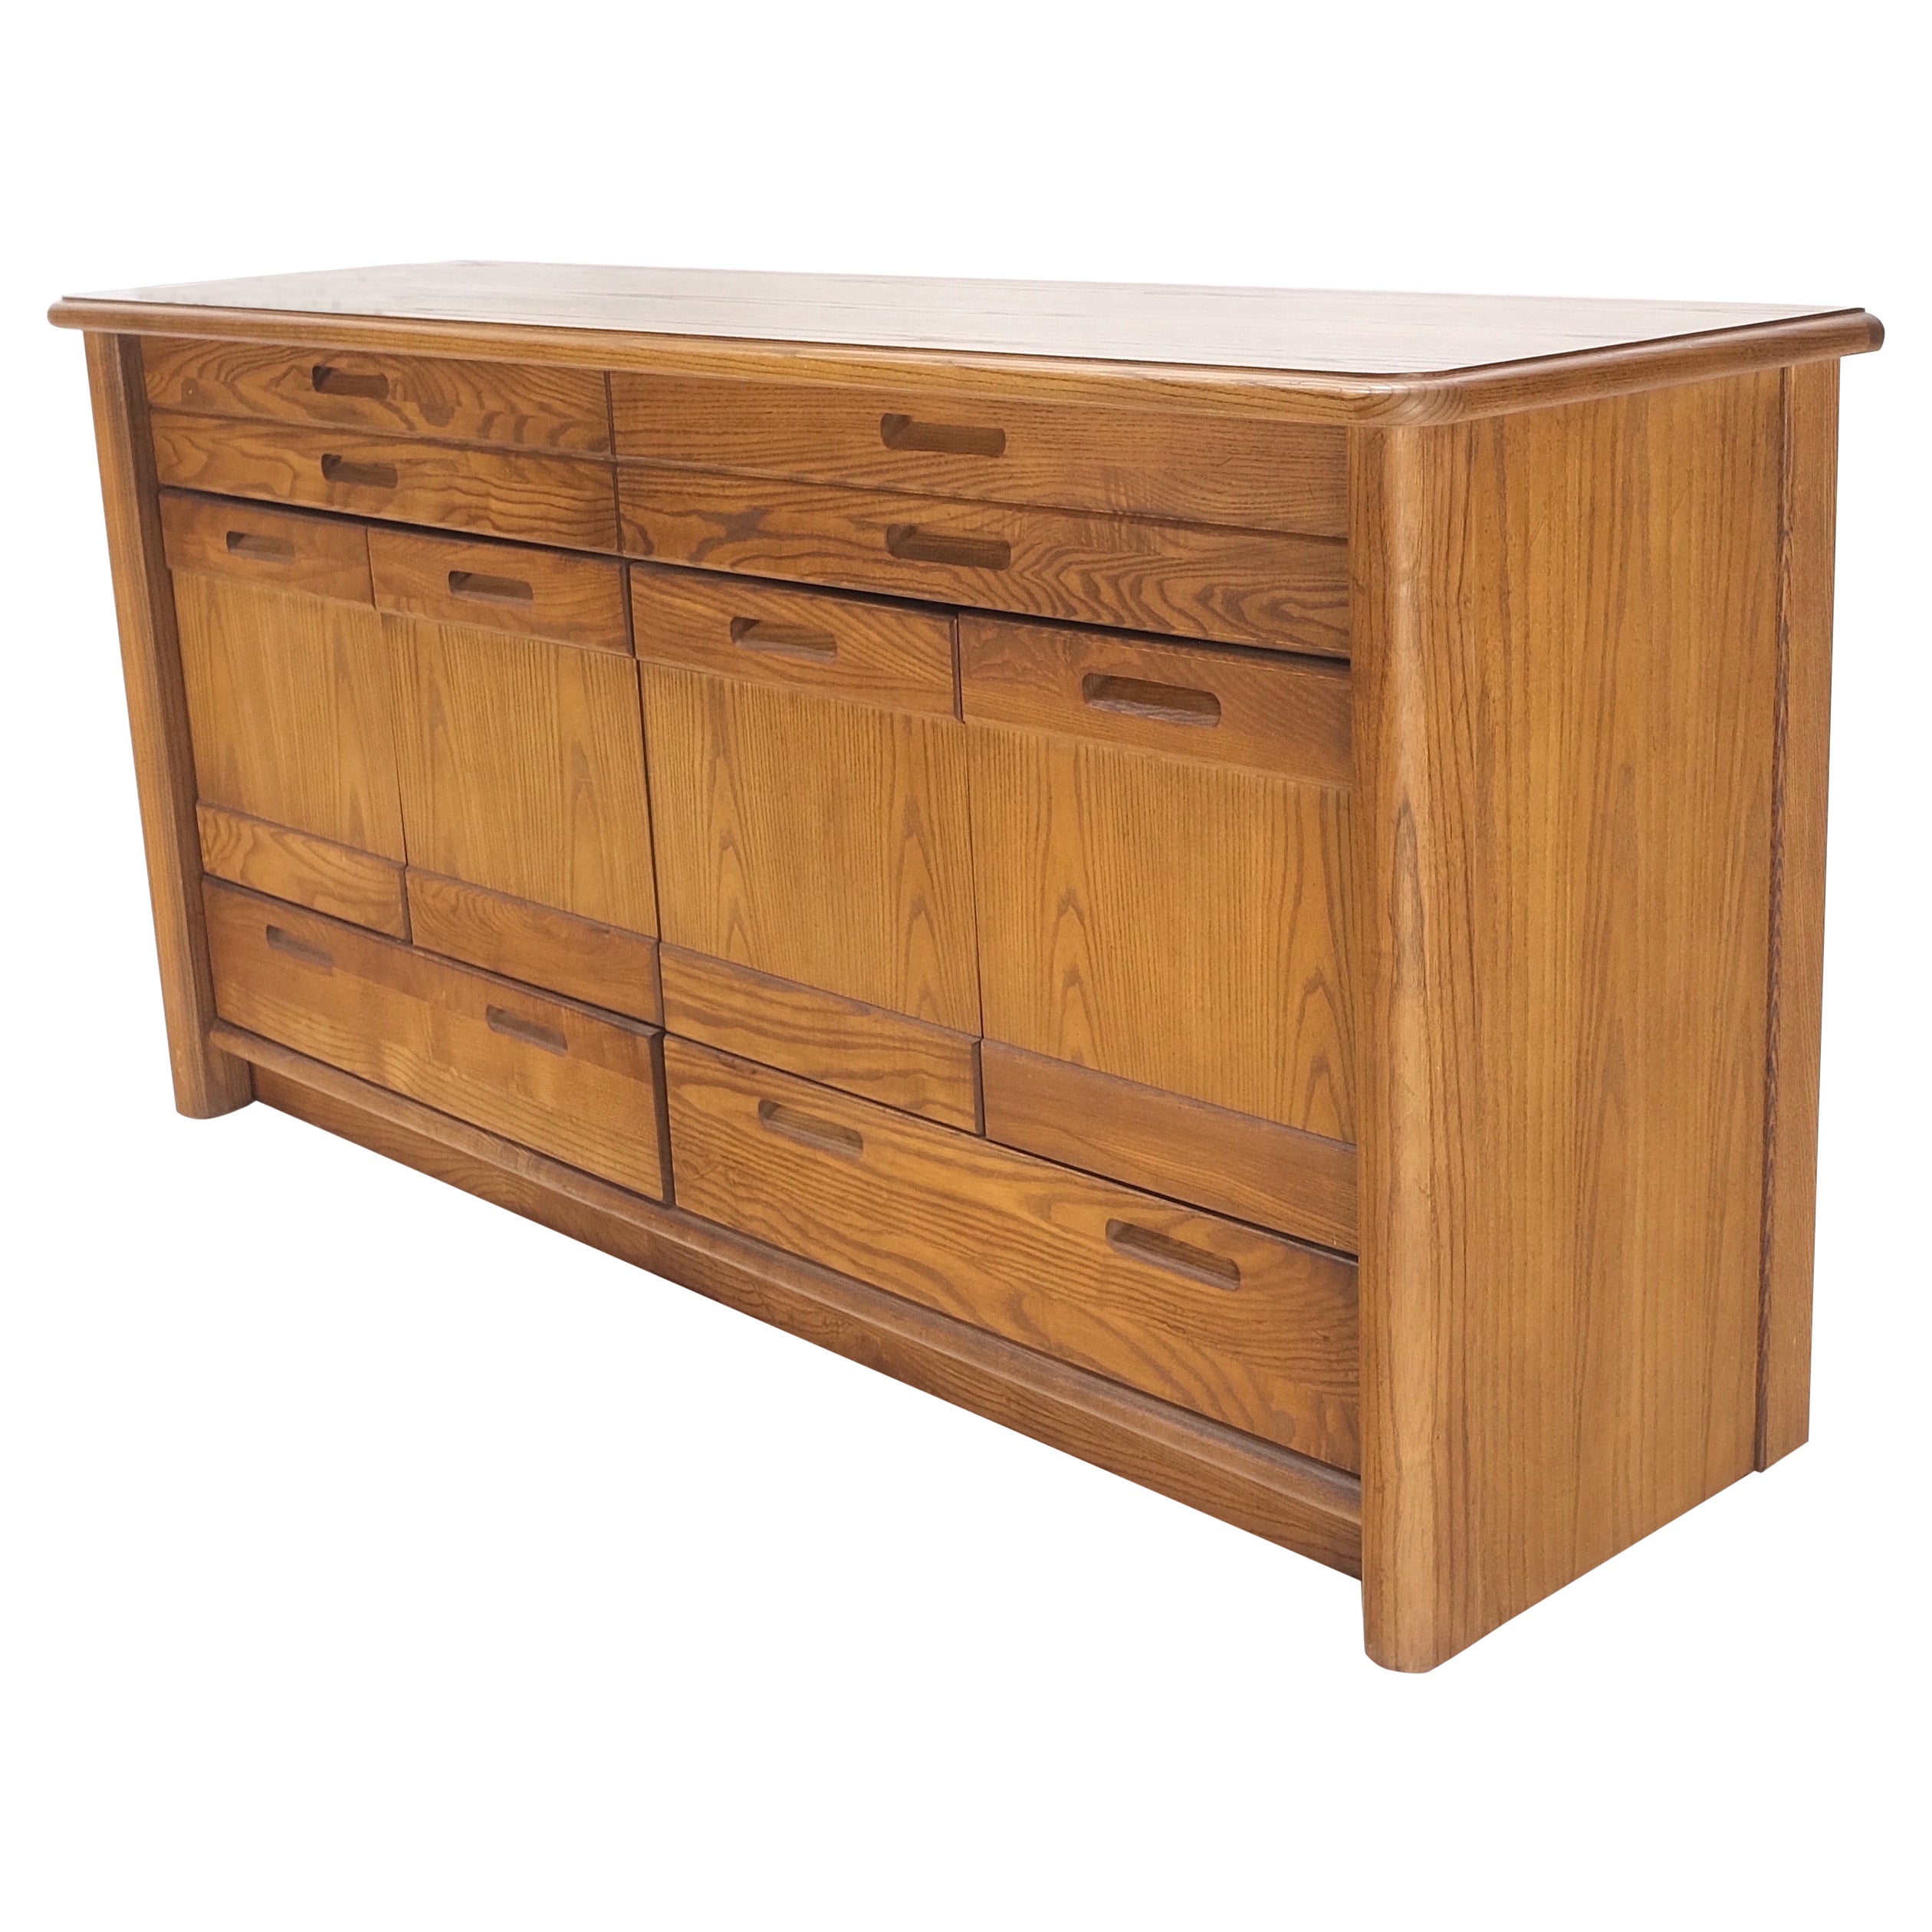 Solid Oak Mid-Century Modern Credenza Server Two Door Compartments Cabinet Mint! For Sale